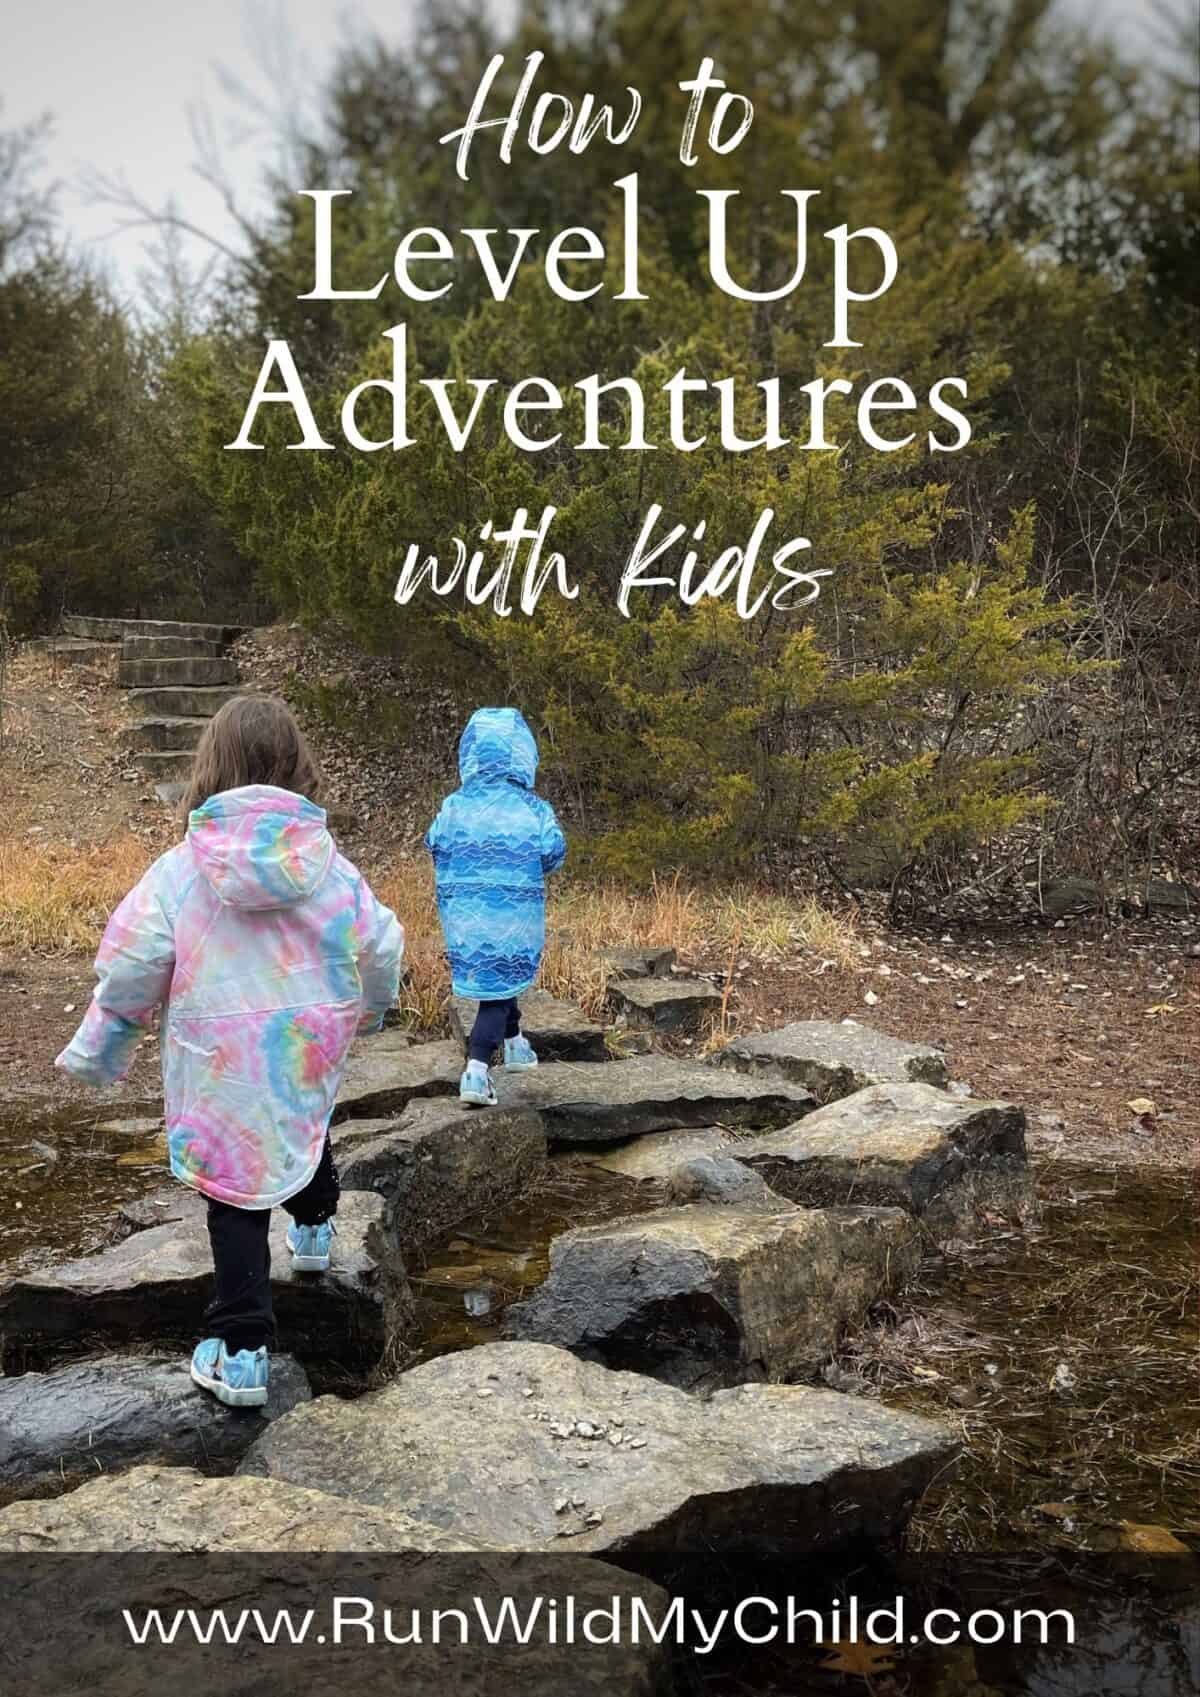 How to Level Up Adventures with Kids